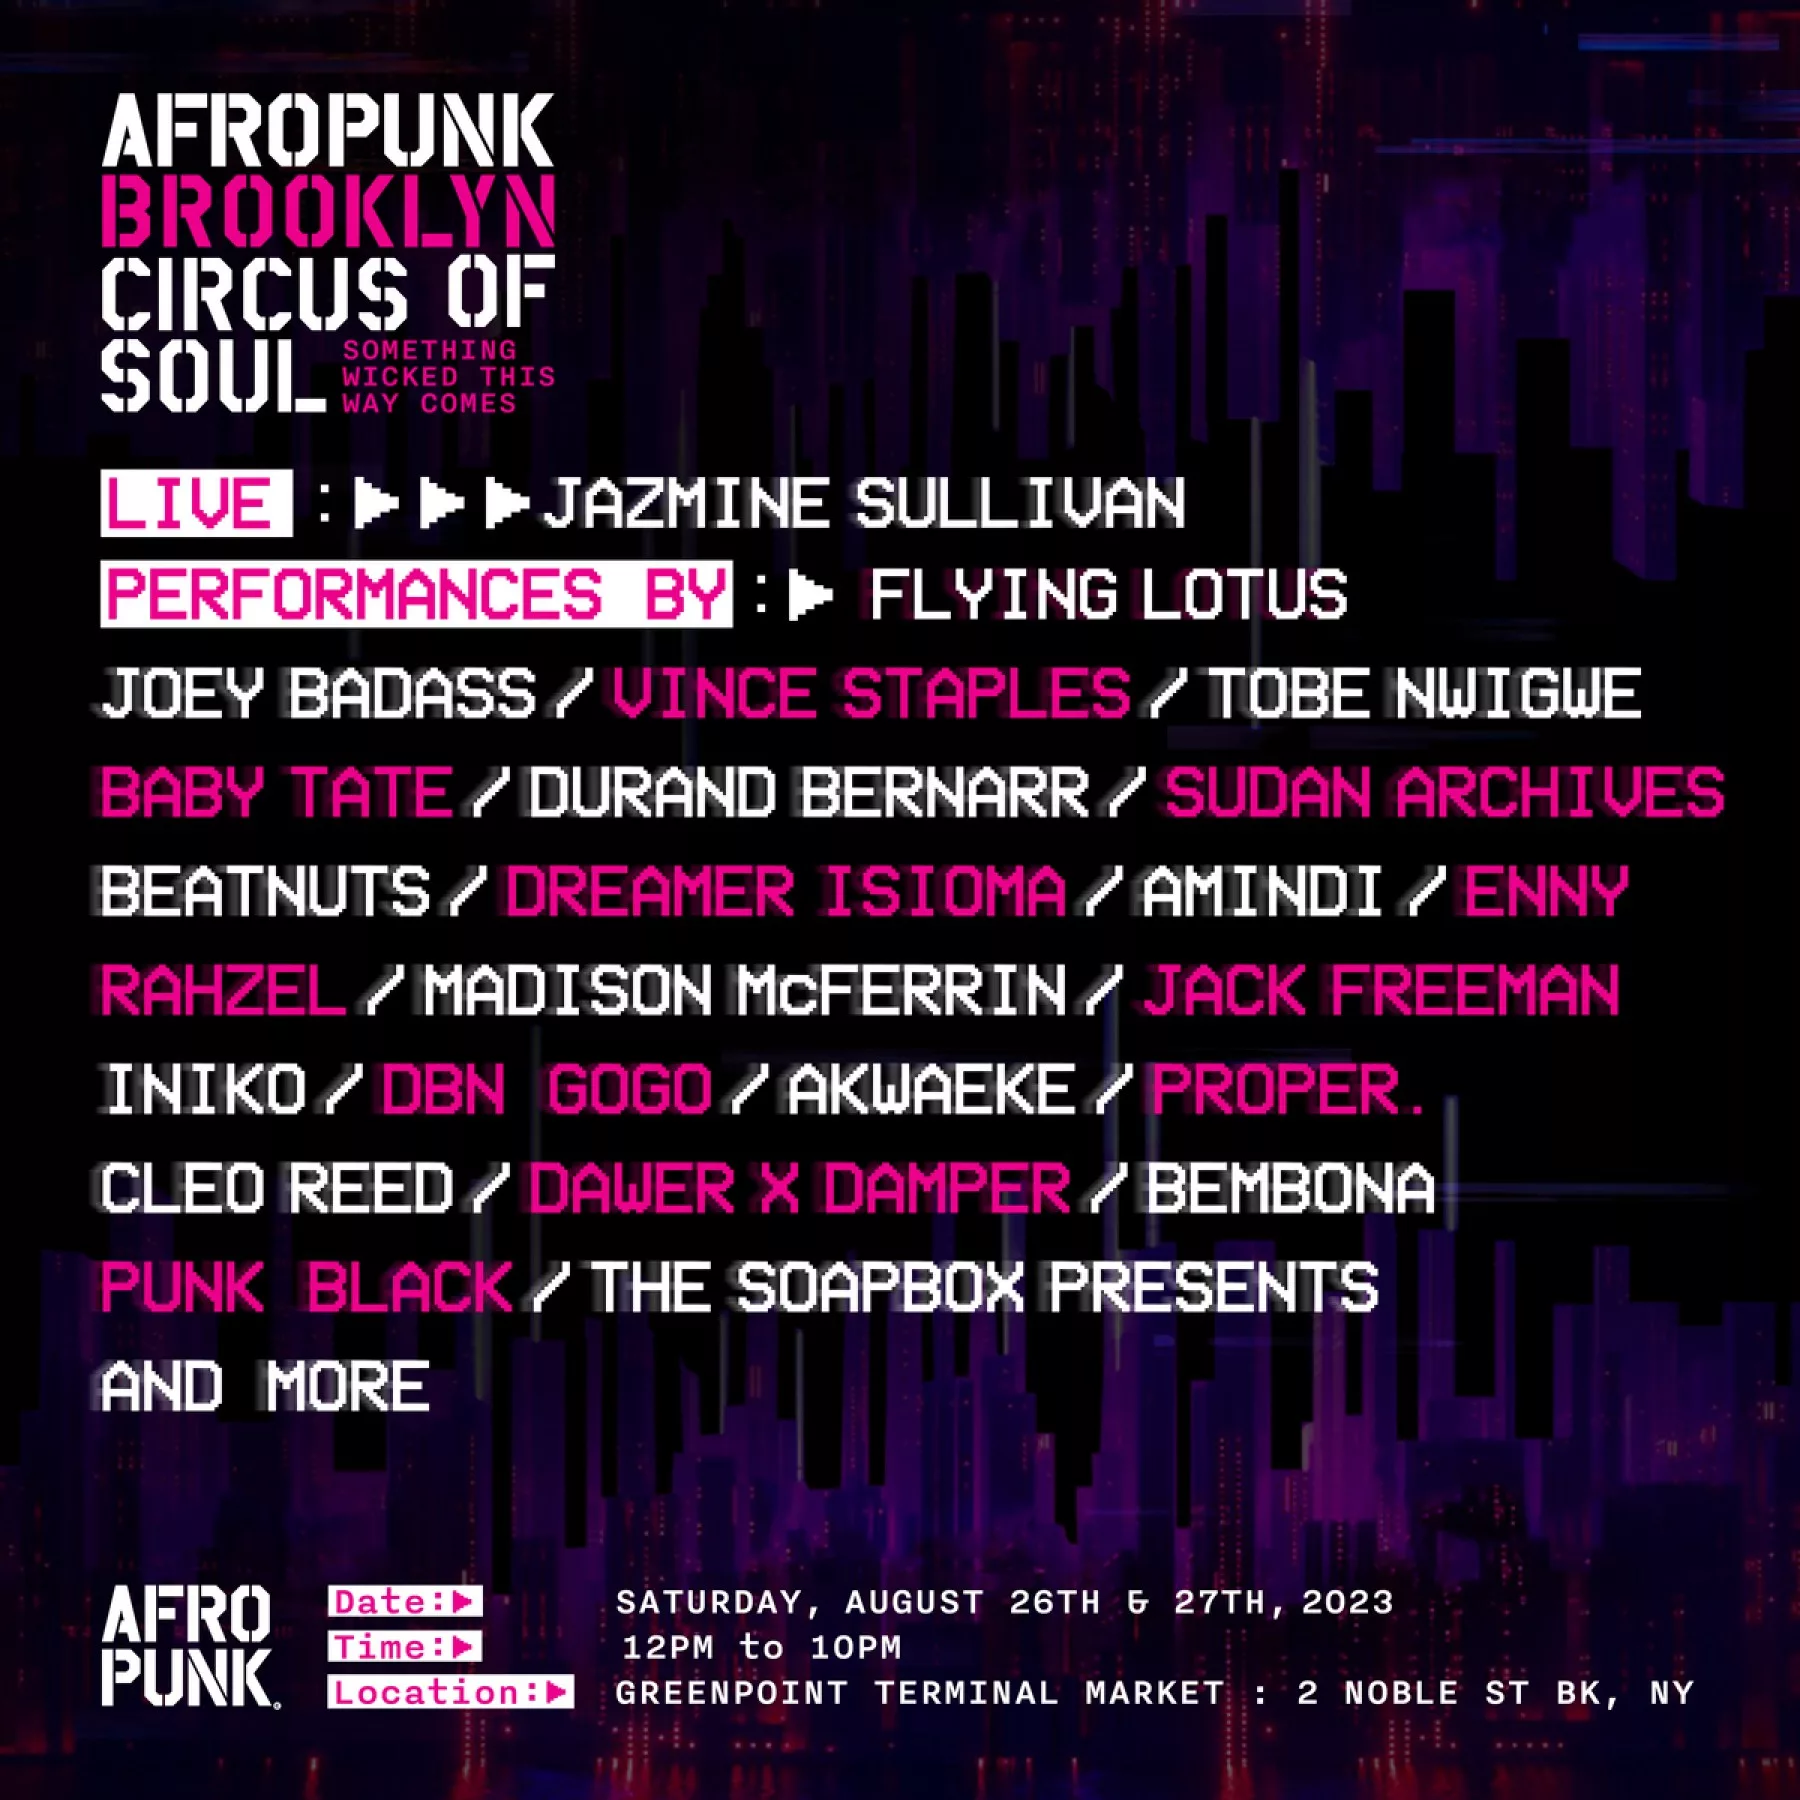 afropunk-brooklyn-2023-lineup-poster.png icon